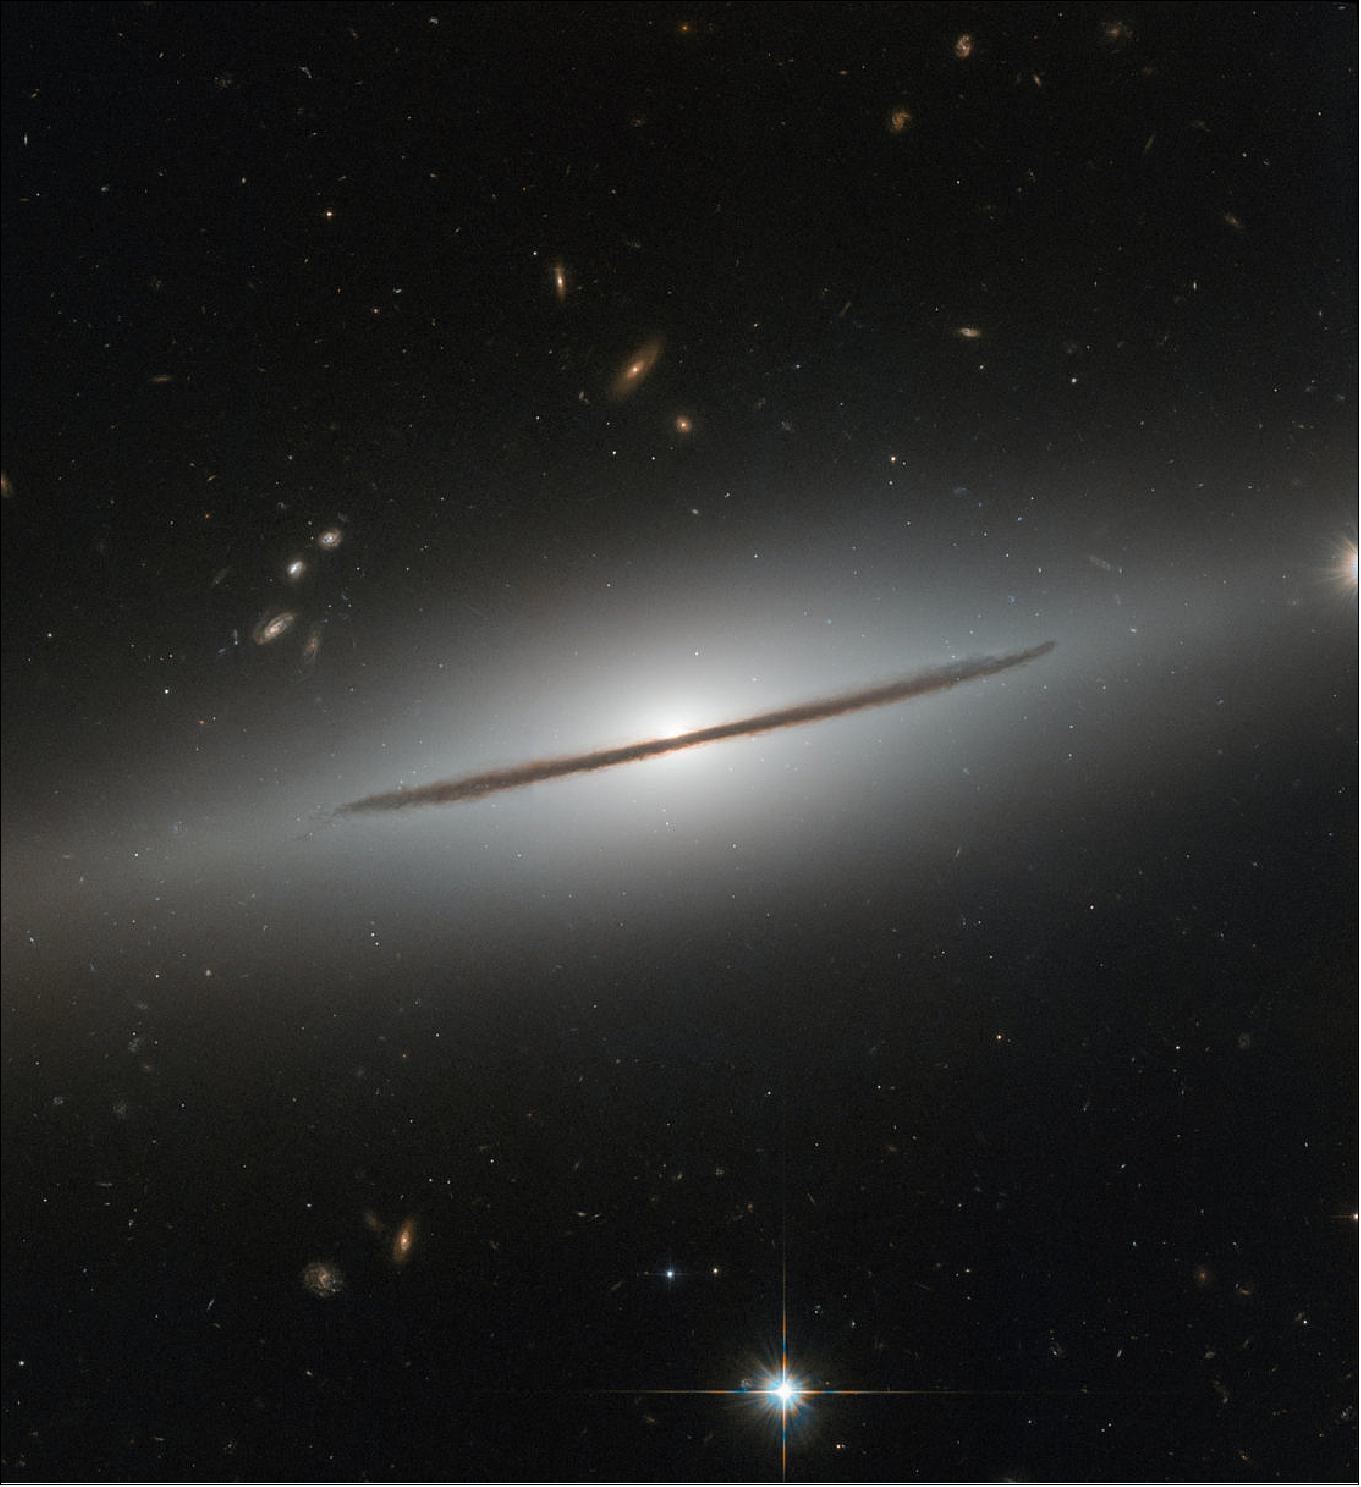 Figure 38: A handful of other galaxies can be seen lurking in the background, scattered around the narrow stripe of NGC 1032. Many are oriented face-on or at tilted angles, showing off their glamorous spiral arms and bright cores. Such orientations provide a wealth of detail about the arms and their nuclei, but fully understanding a galaxy’s three-dimensional structure also requires an edge-on view. This gives astronomers an overall idea of how stars are distributed throughout the galaxy and allows them to measure the “height” of the disc and the bright star-studded core (image credit: ESA/Hubble & NASA, CC BY 4.0)